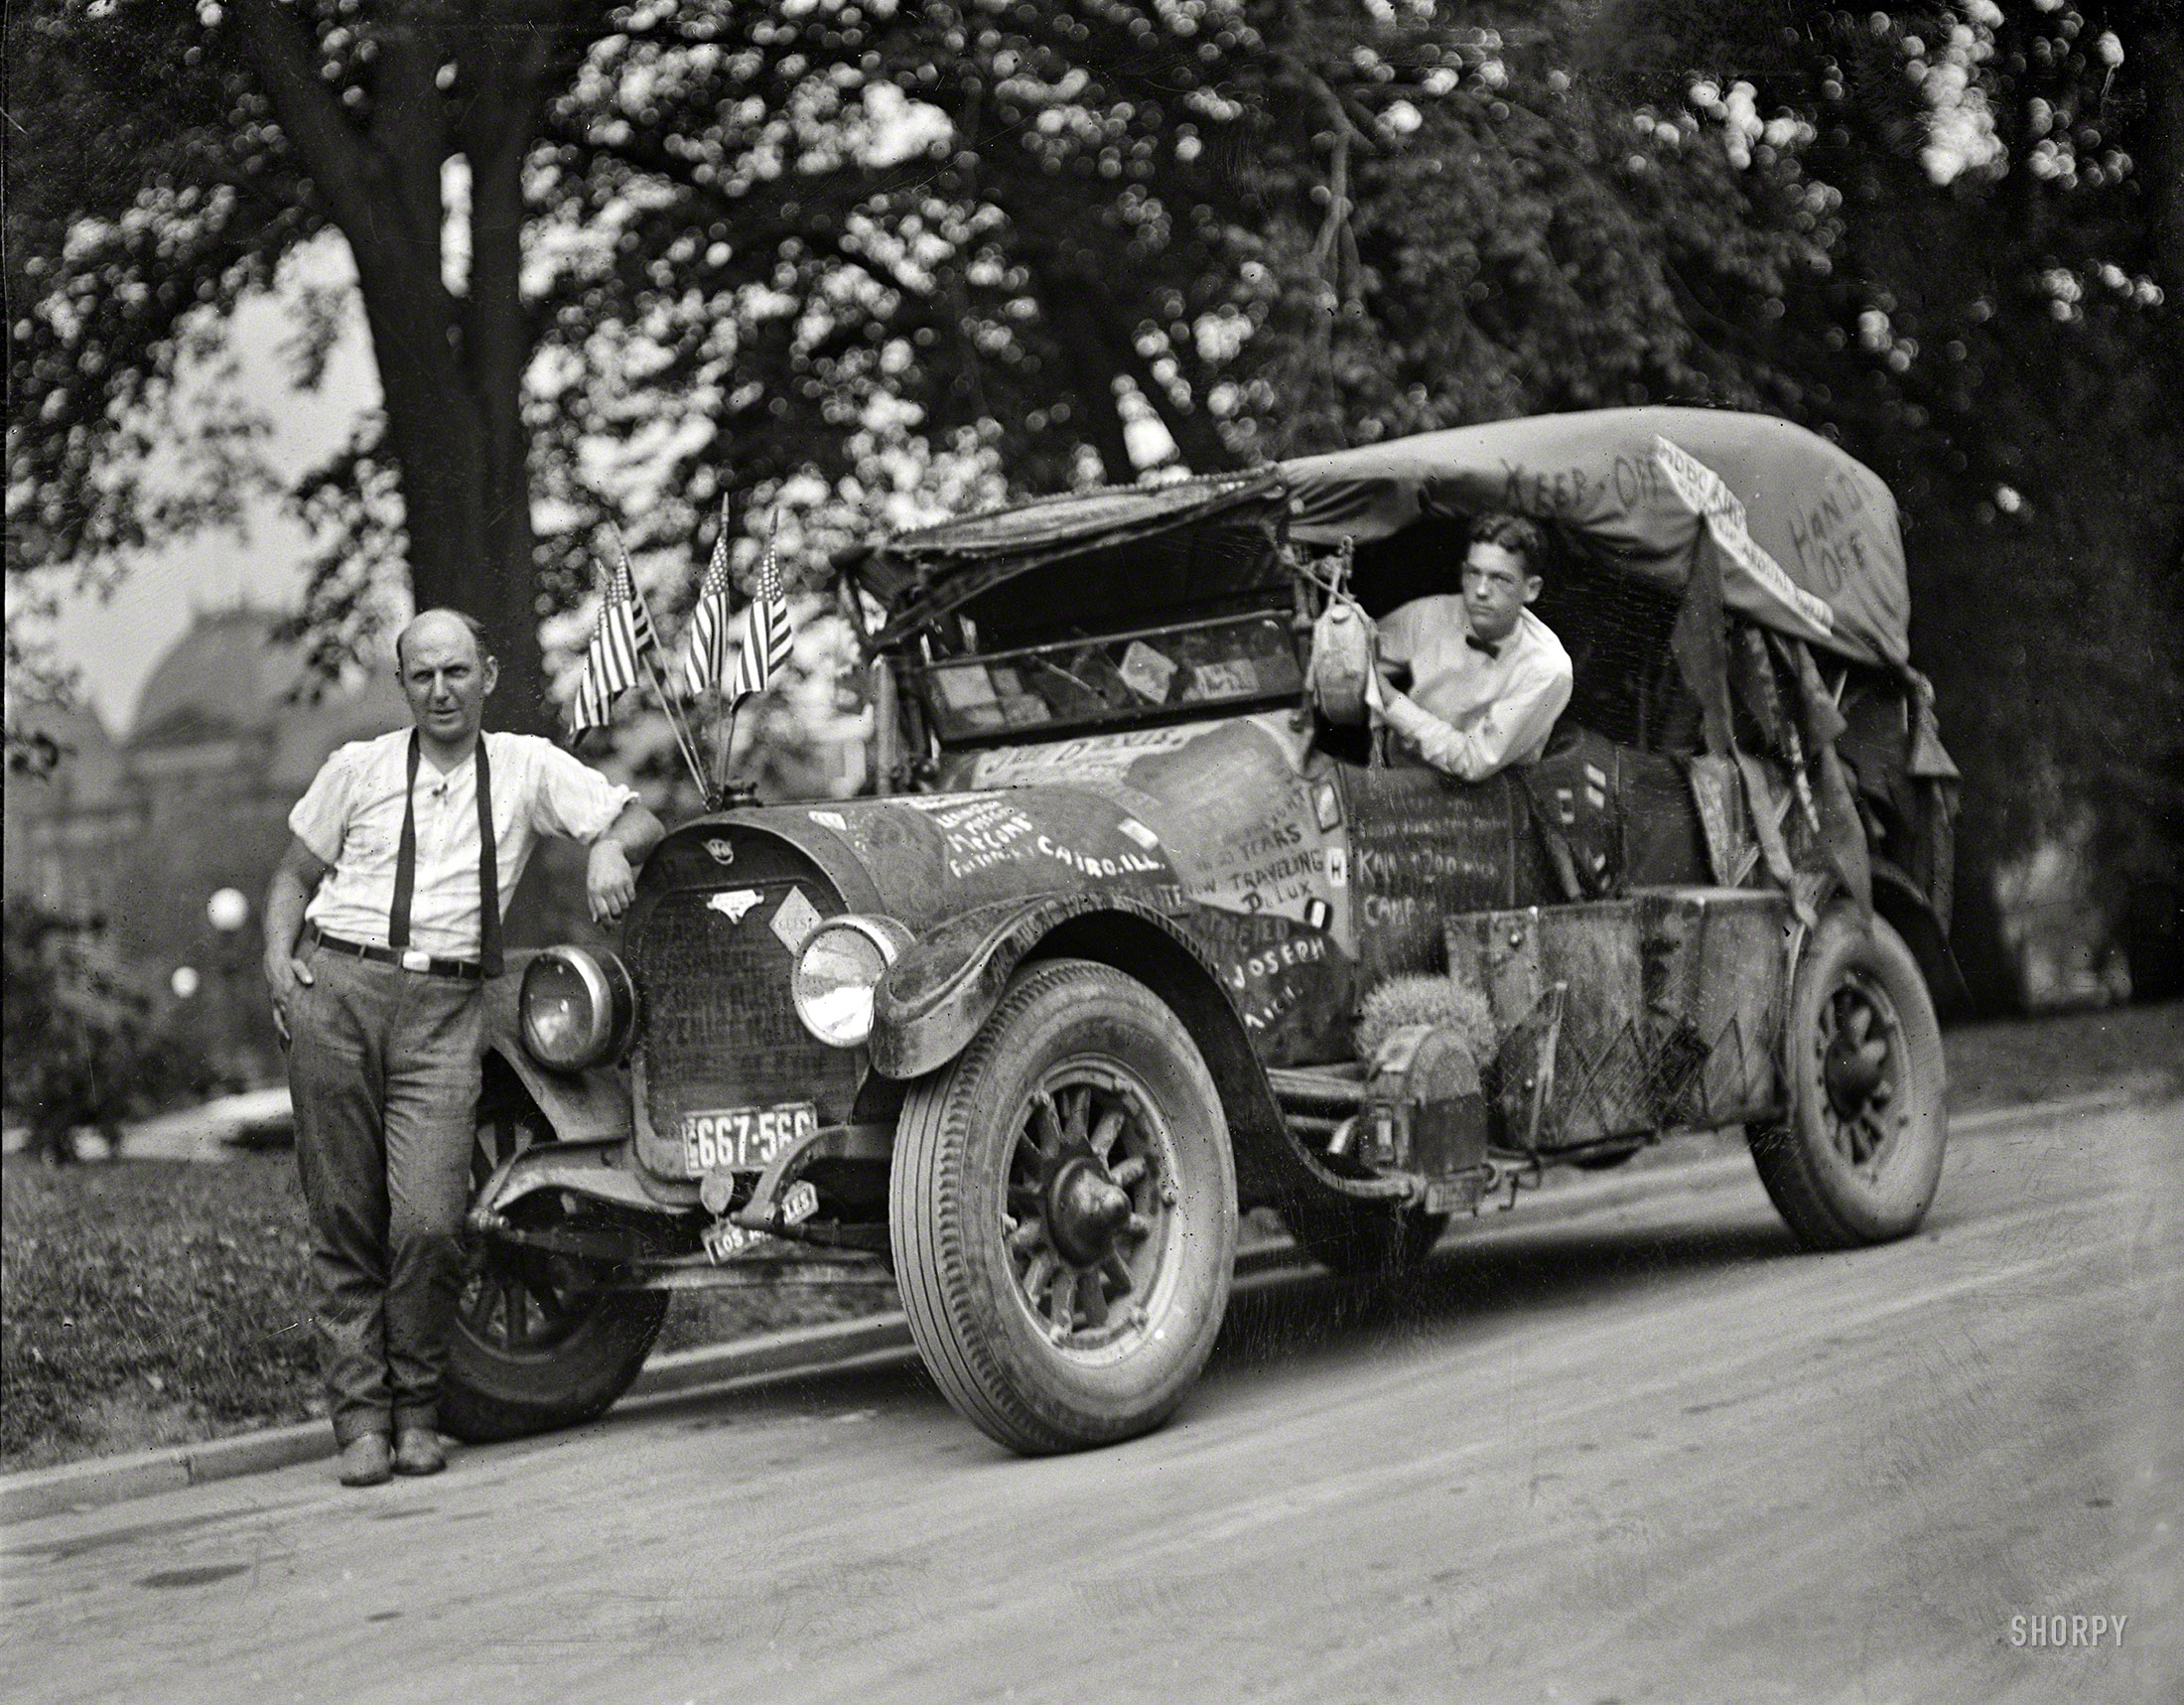 August 1924. Washington, D.C. Jeff Davis, self-styled Hobo King (as well as founder of various Hotels de Gink, a chain of hostels for the homeless), standing next to his jalopy and driver. Harris & Ewing glass negative. View full size.